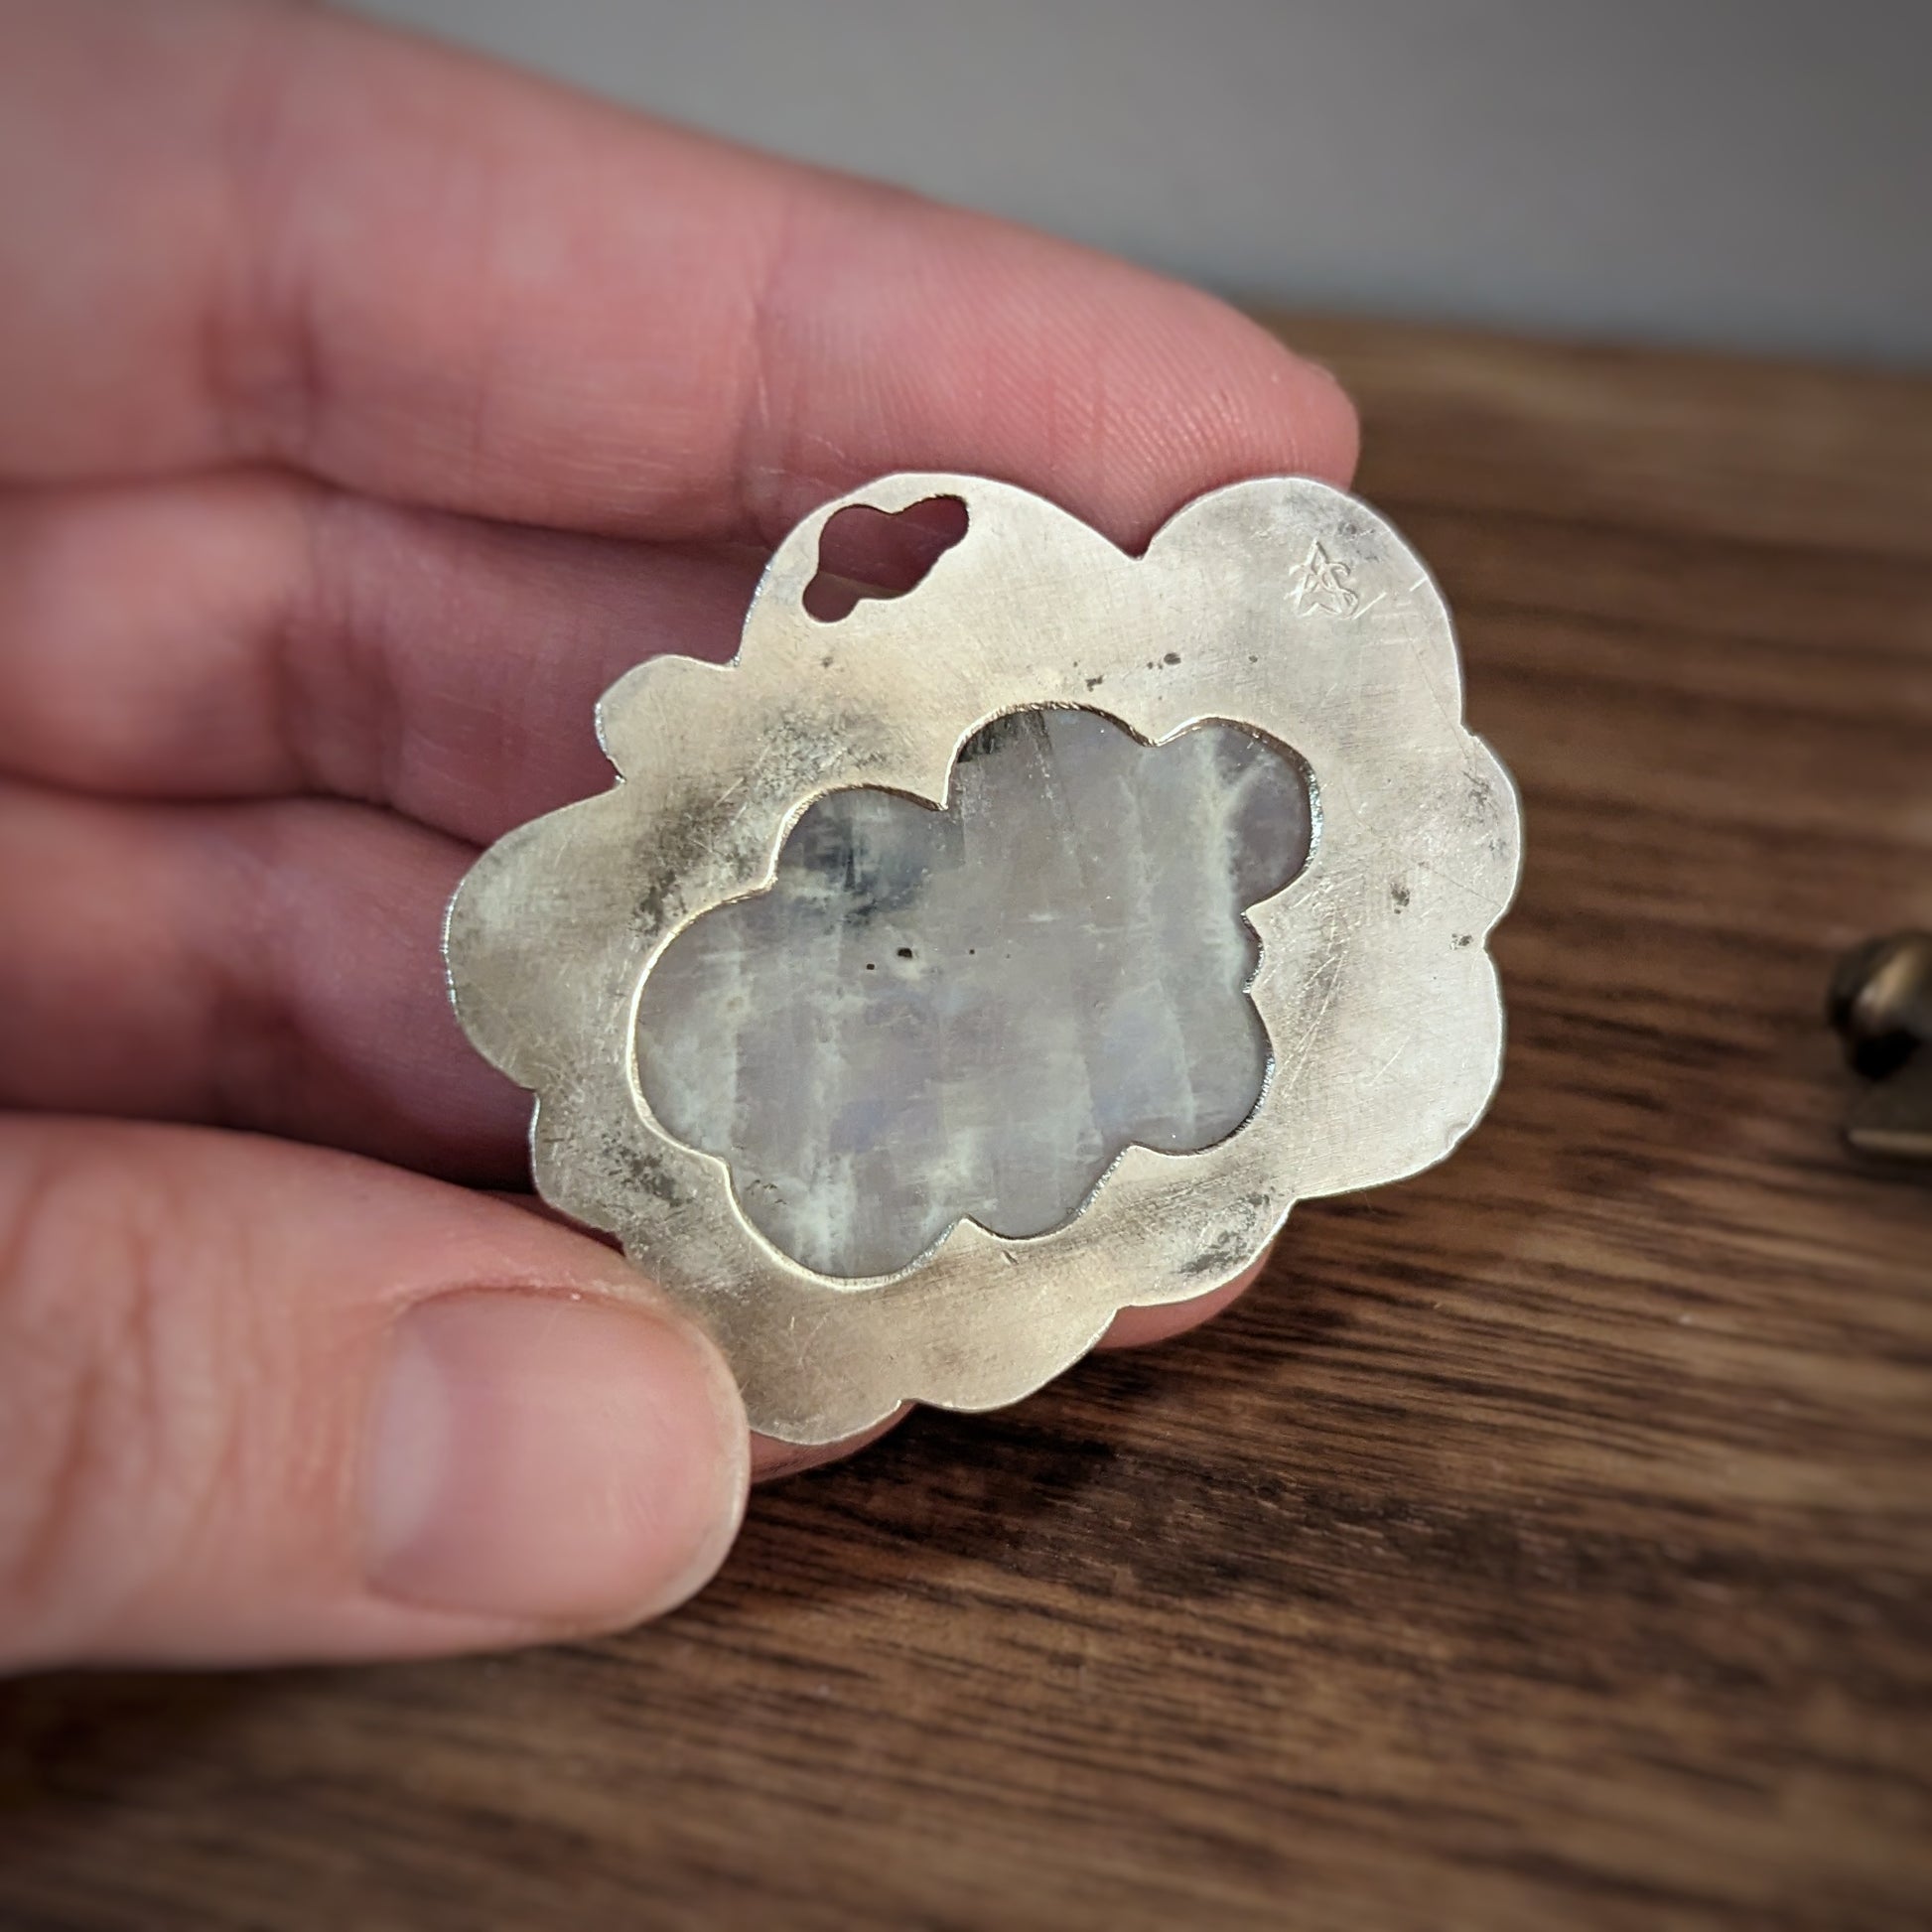 A hand holds a silver cloud pendant with a large oval moonstone in a scalloped edge setting with hammered details on the edges, turned to show a cloud cutout on the back for light to pass through.